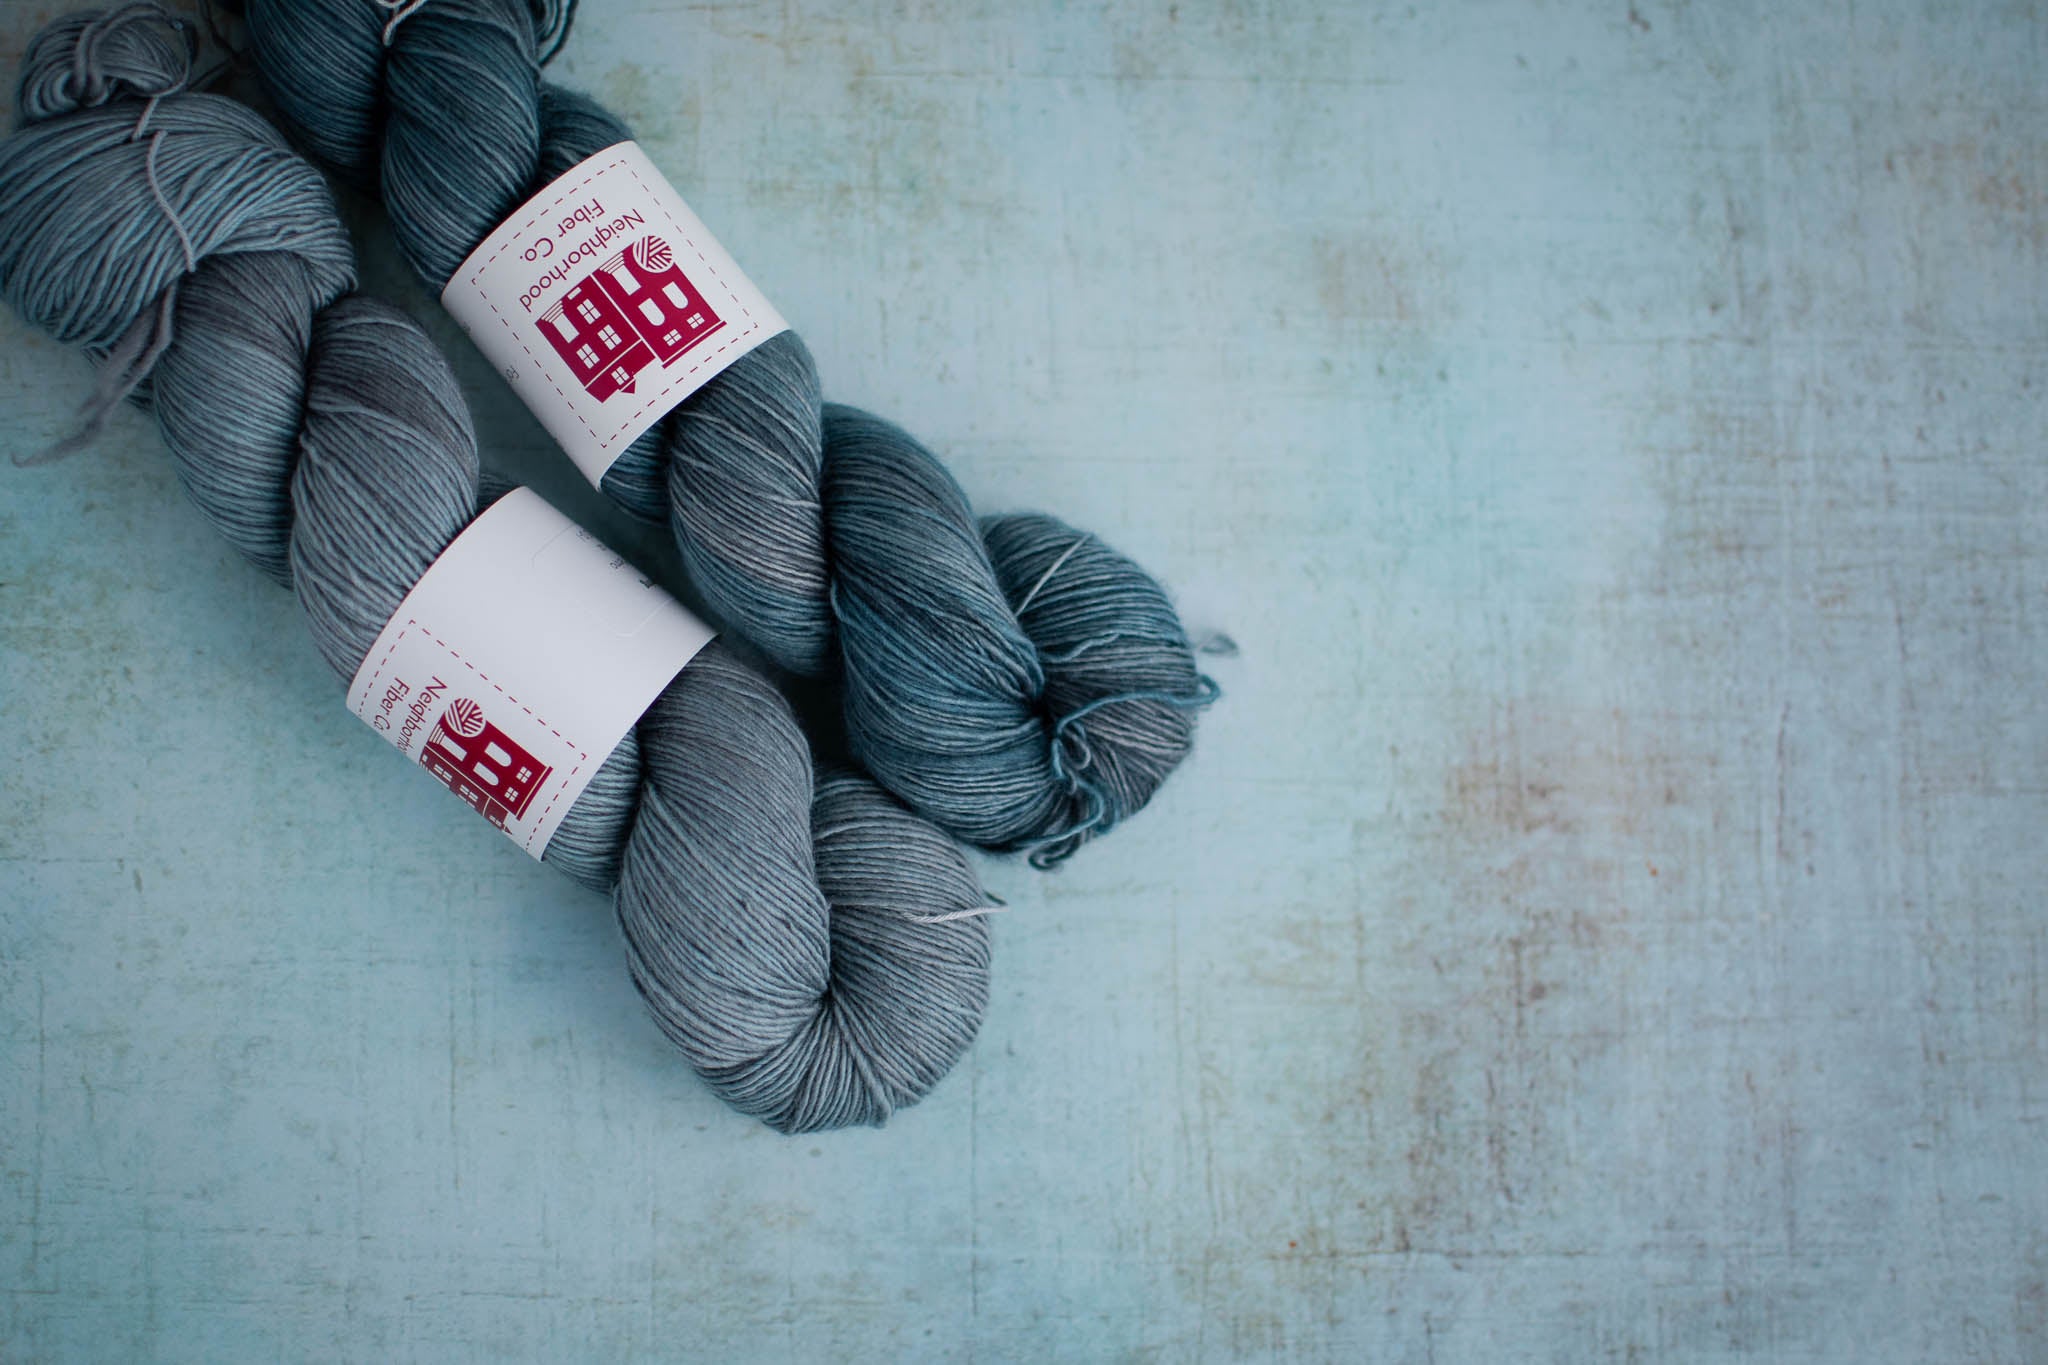 Two skeins of blue grey yarn lie next to each other on a flat surface. The skein to the right is darker and more saturated.